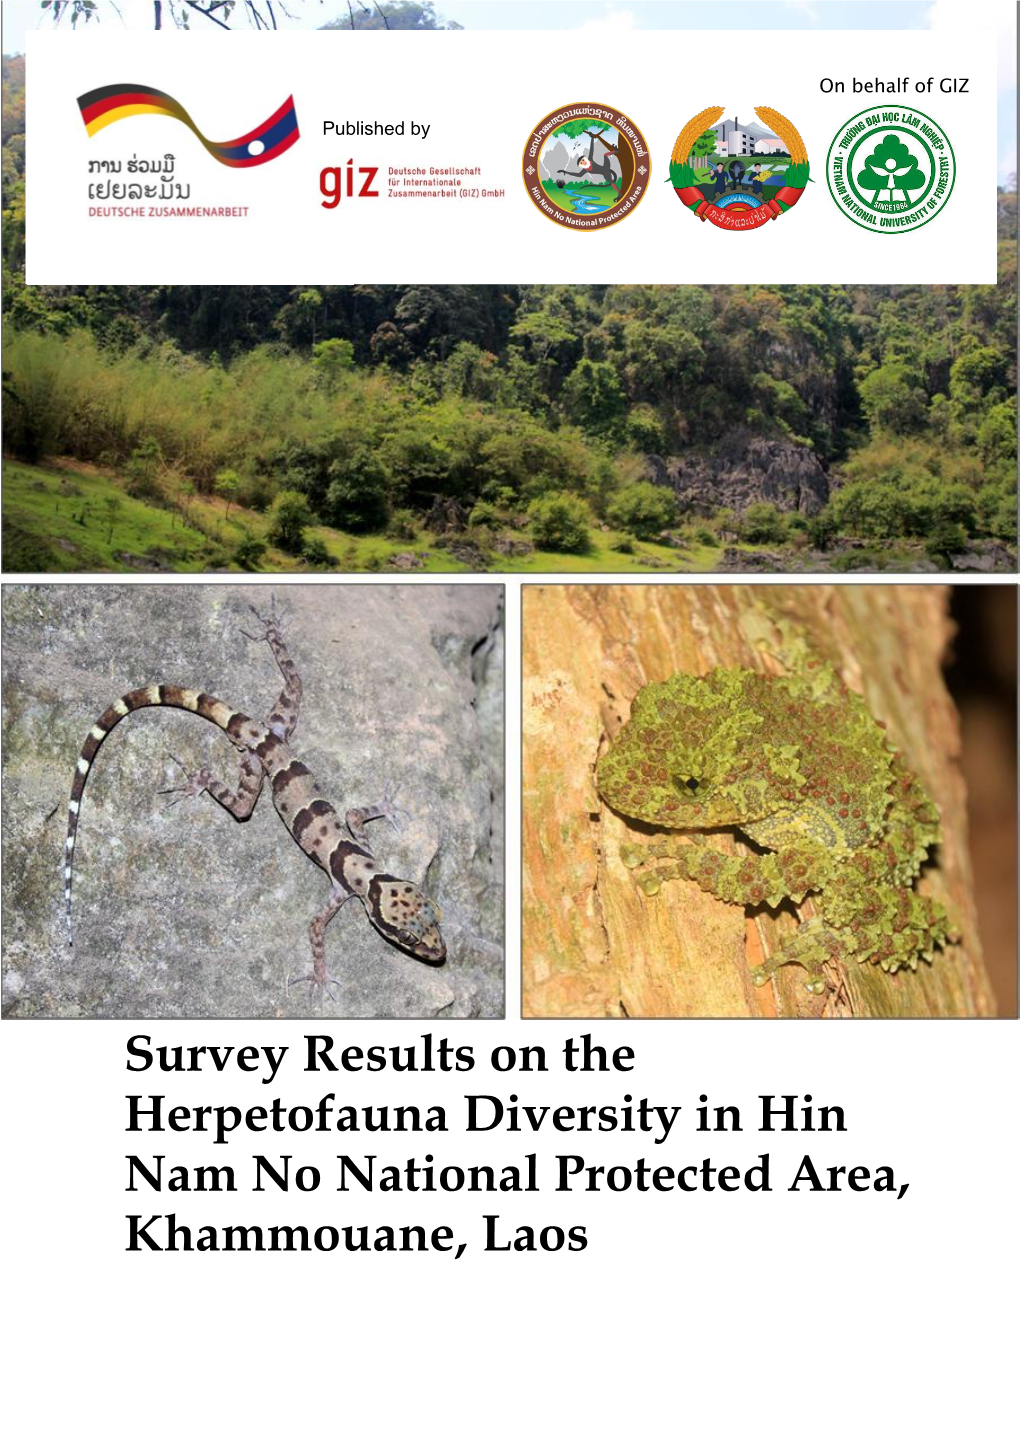 Survey Results on the Herpetofauna Diversity in Hin Nam No National Protected Area, Khammouane, Laos